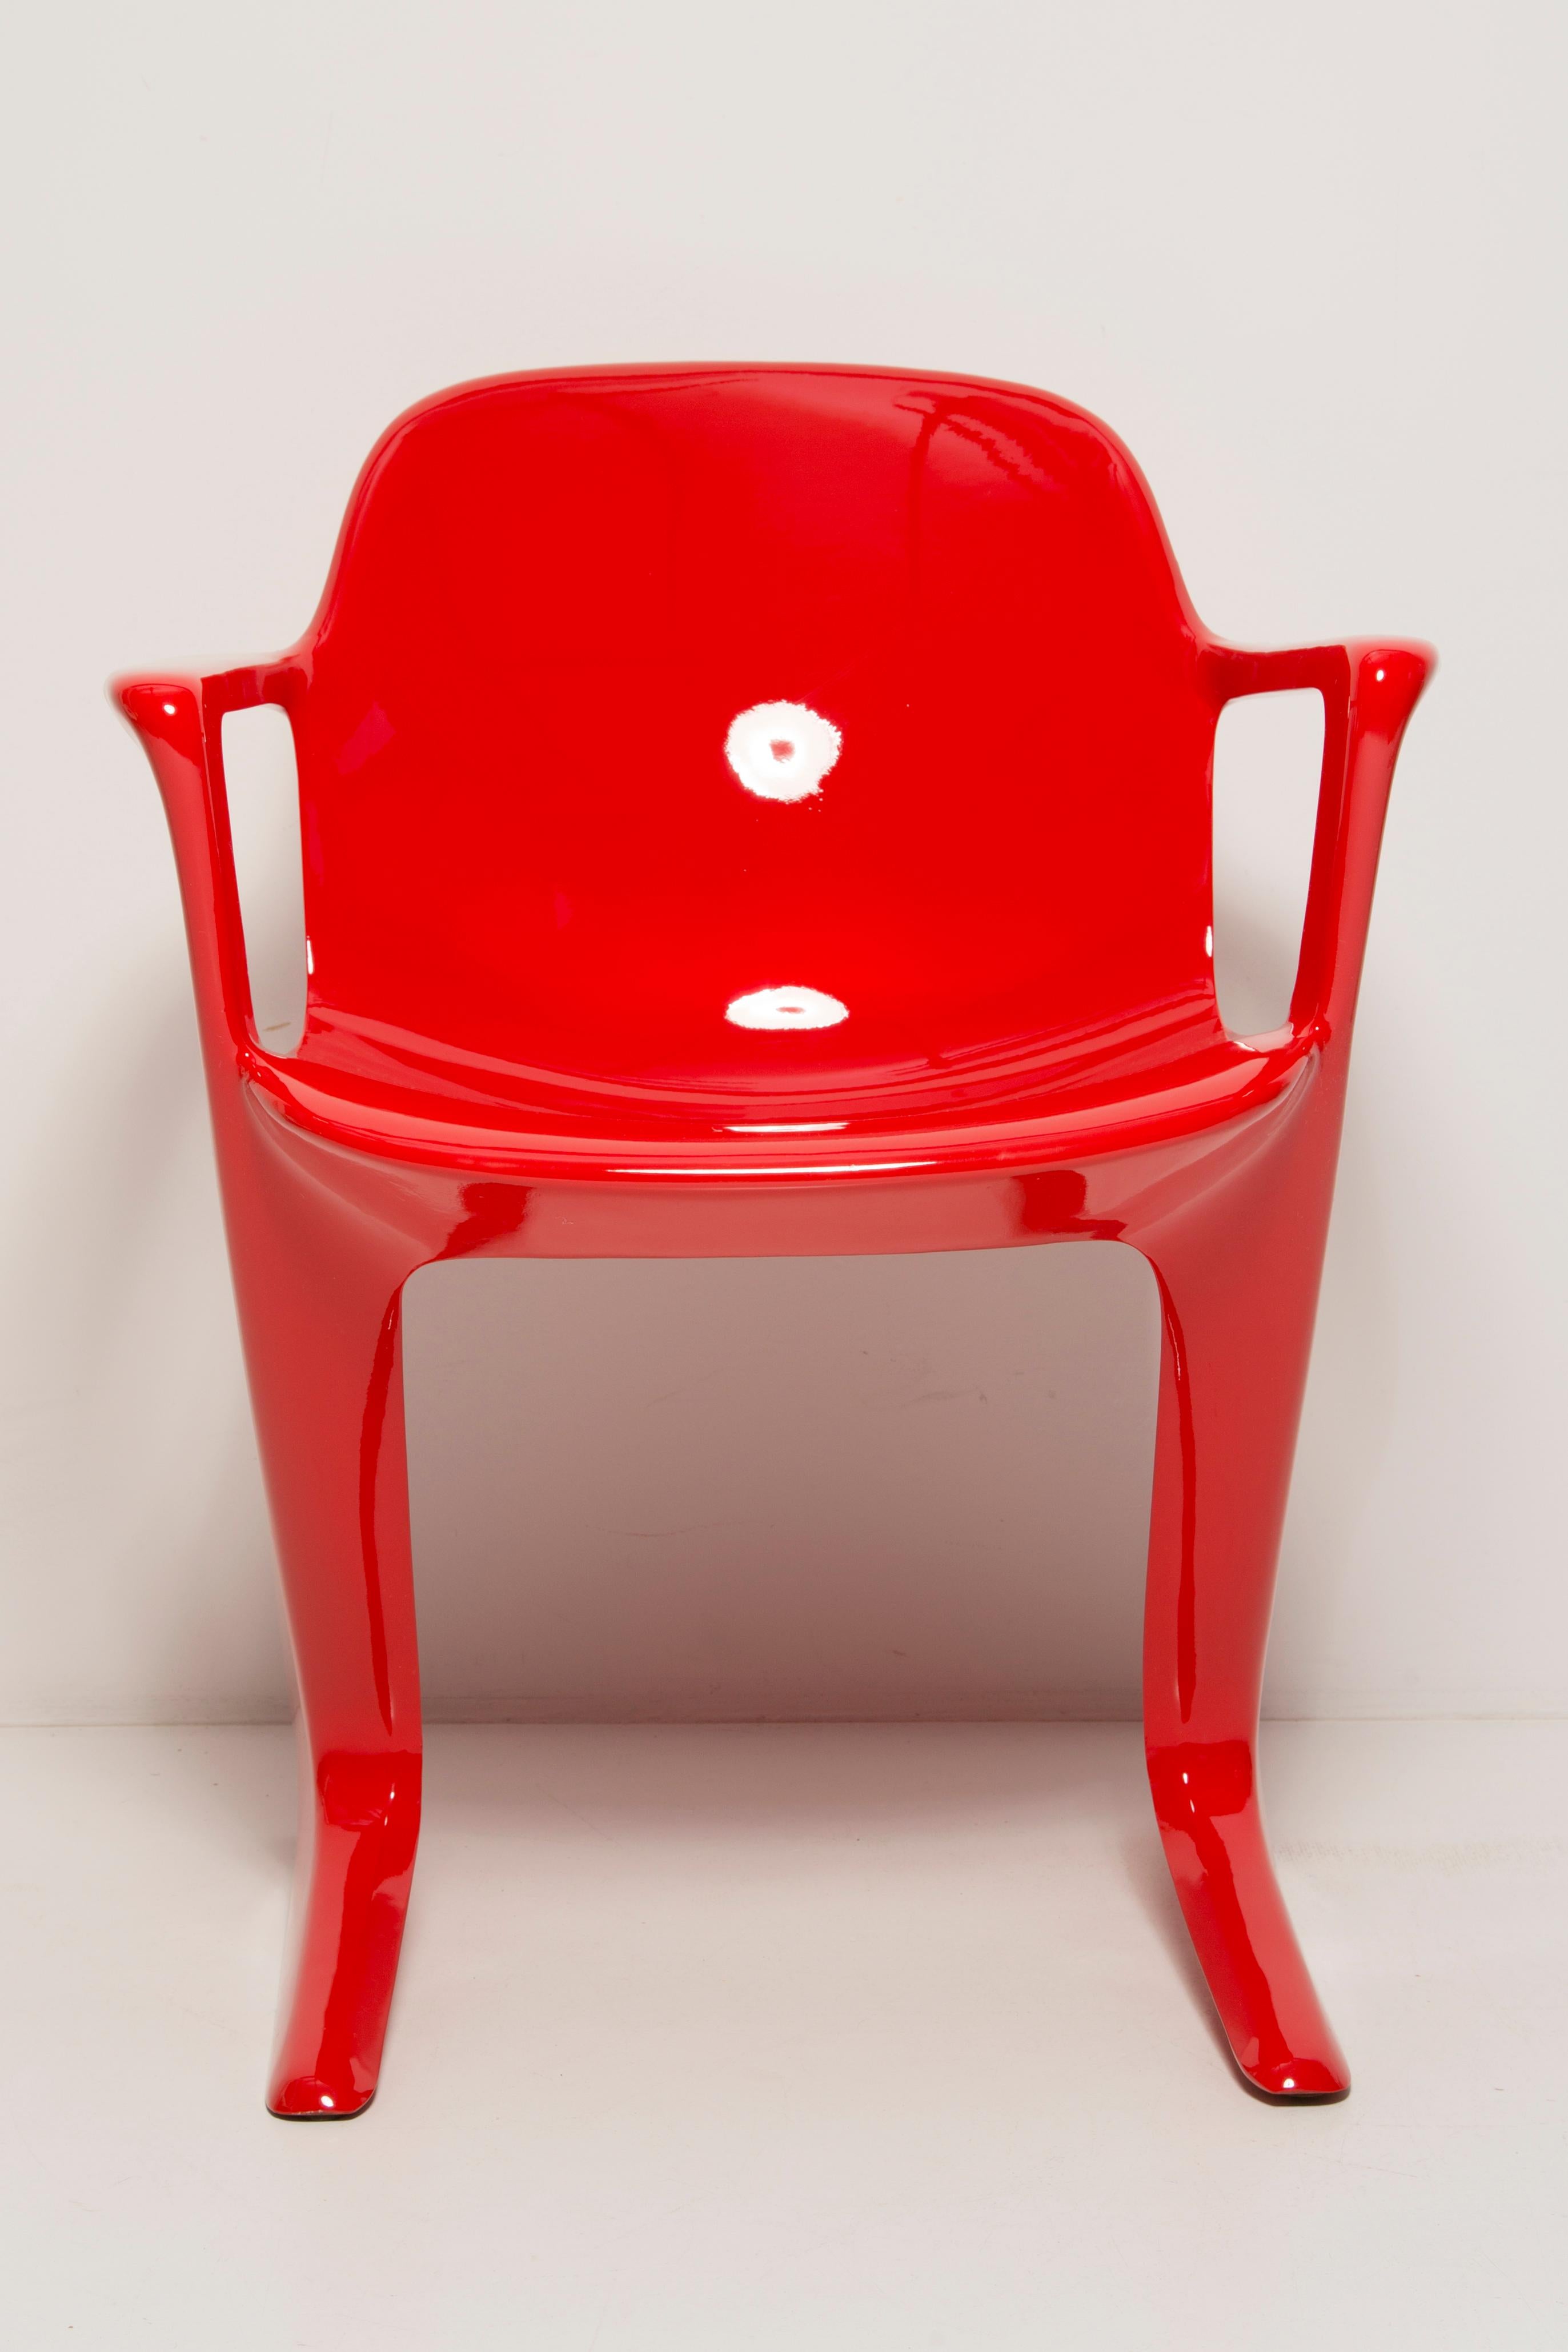 Midcentury Signal Red Kangaroo Chair Designed by Ernst Moeckl, Germany, 1968 For Sale 5